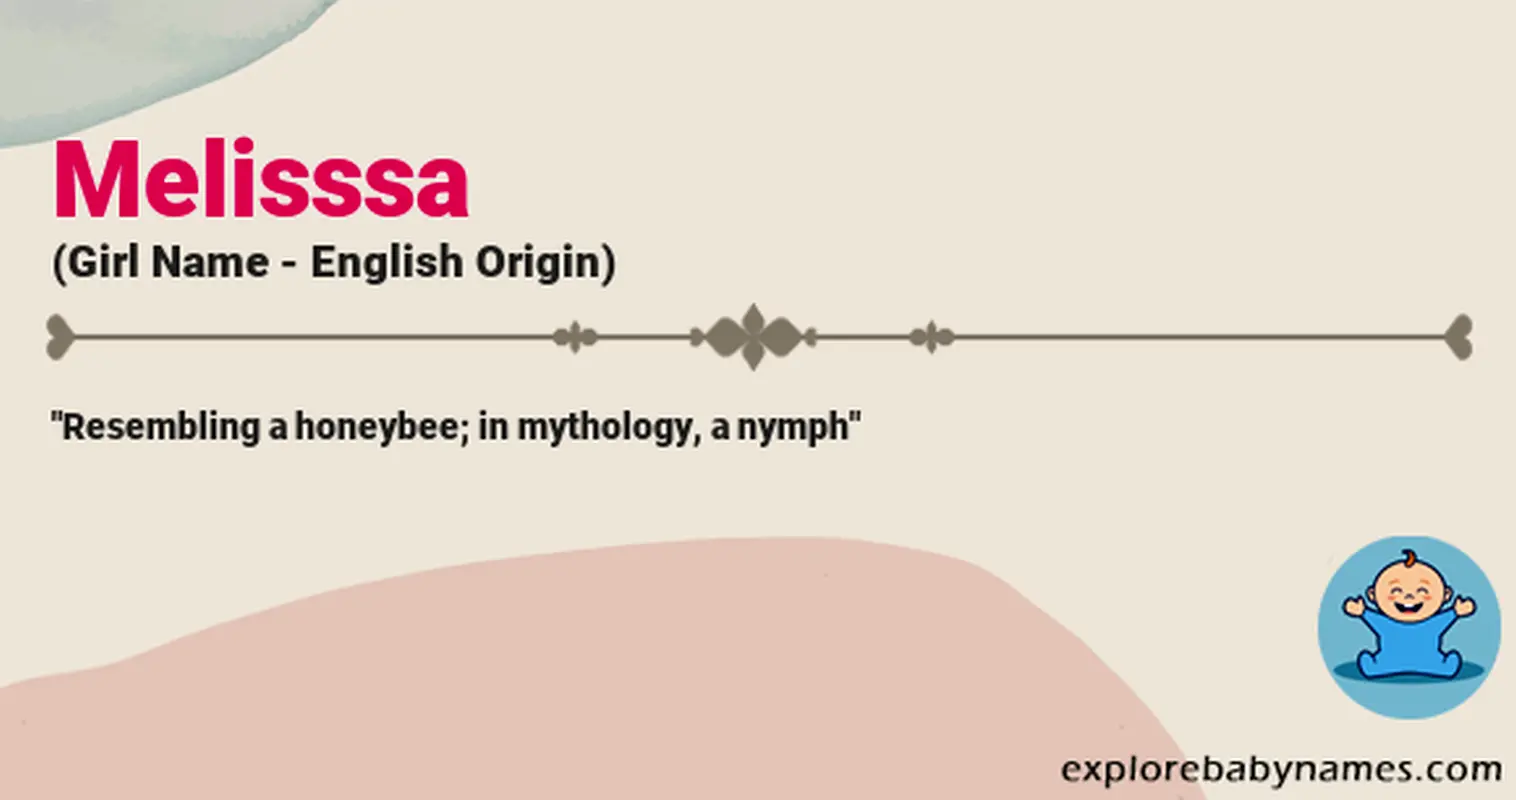 Meaning of Melisssa